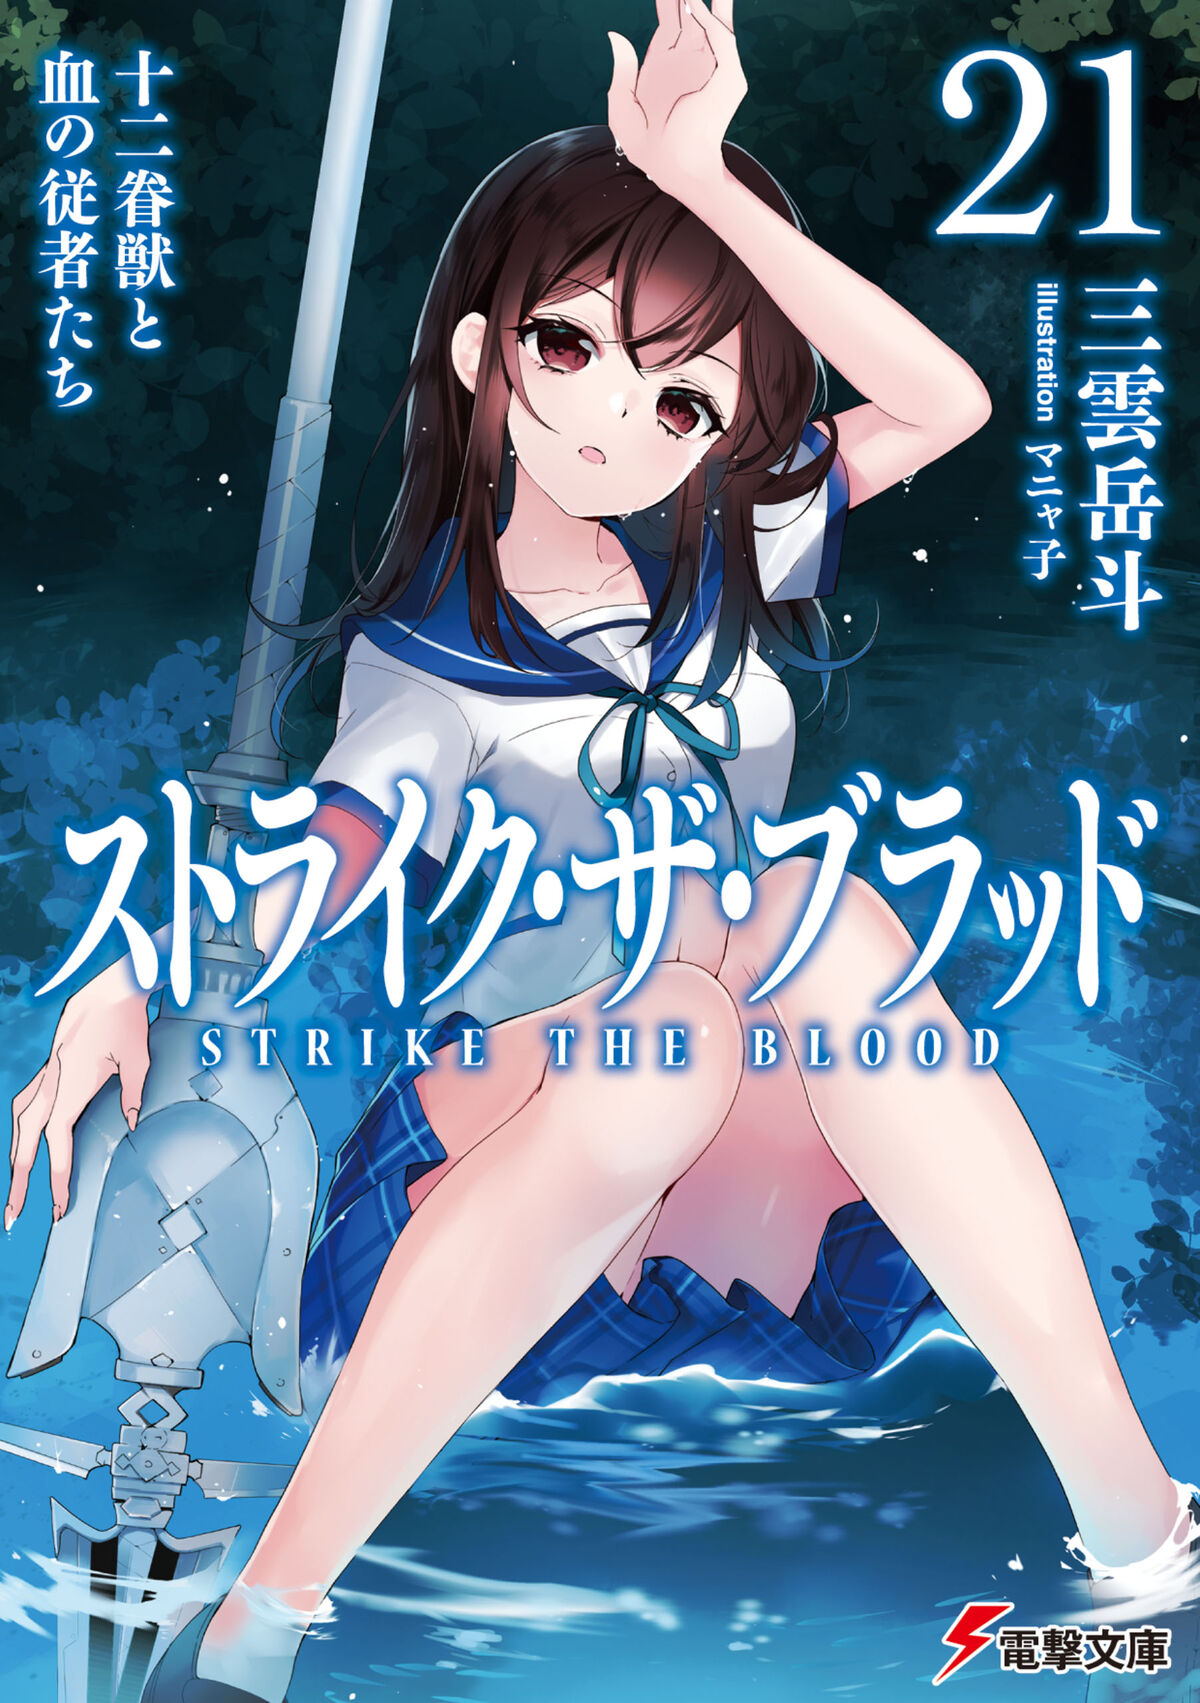 Strike The Blood IV All 6 Volumes Now Available For Sale - Anime